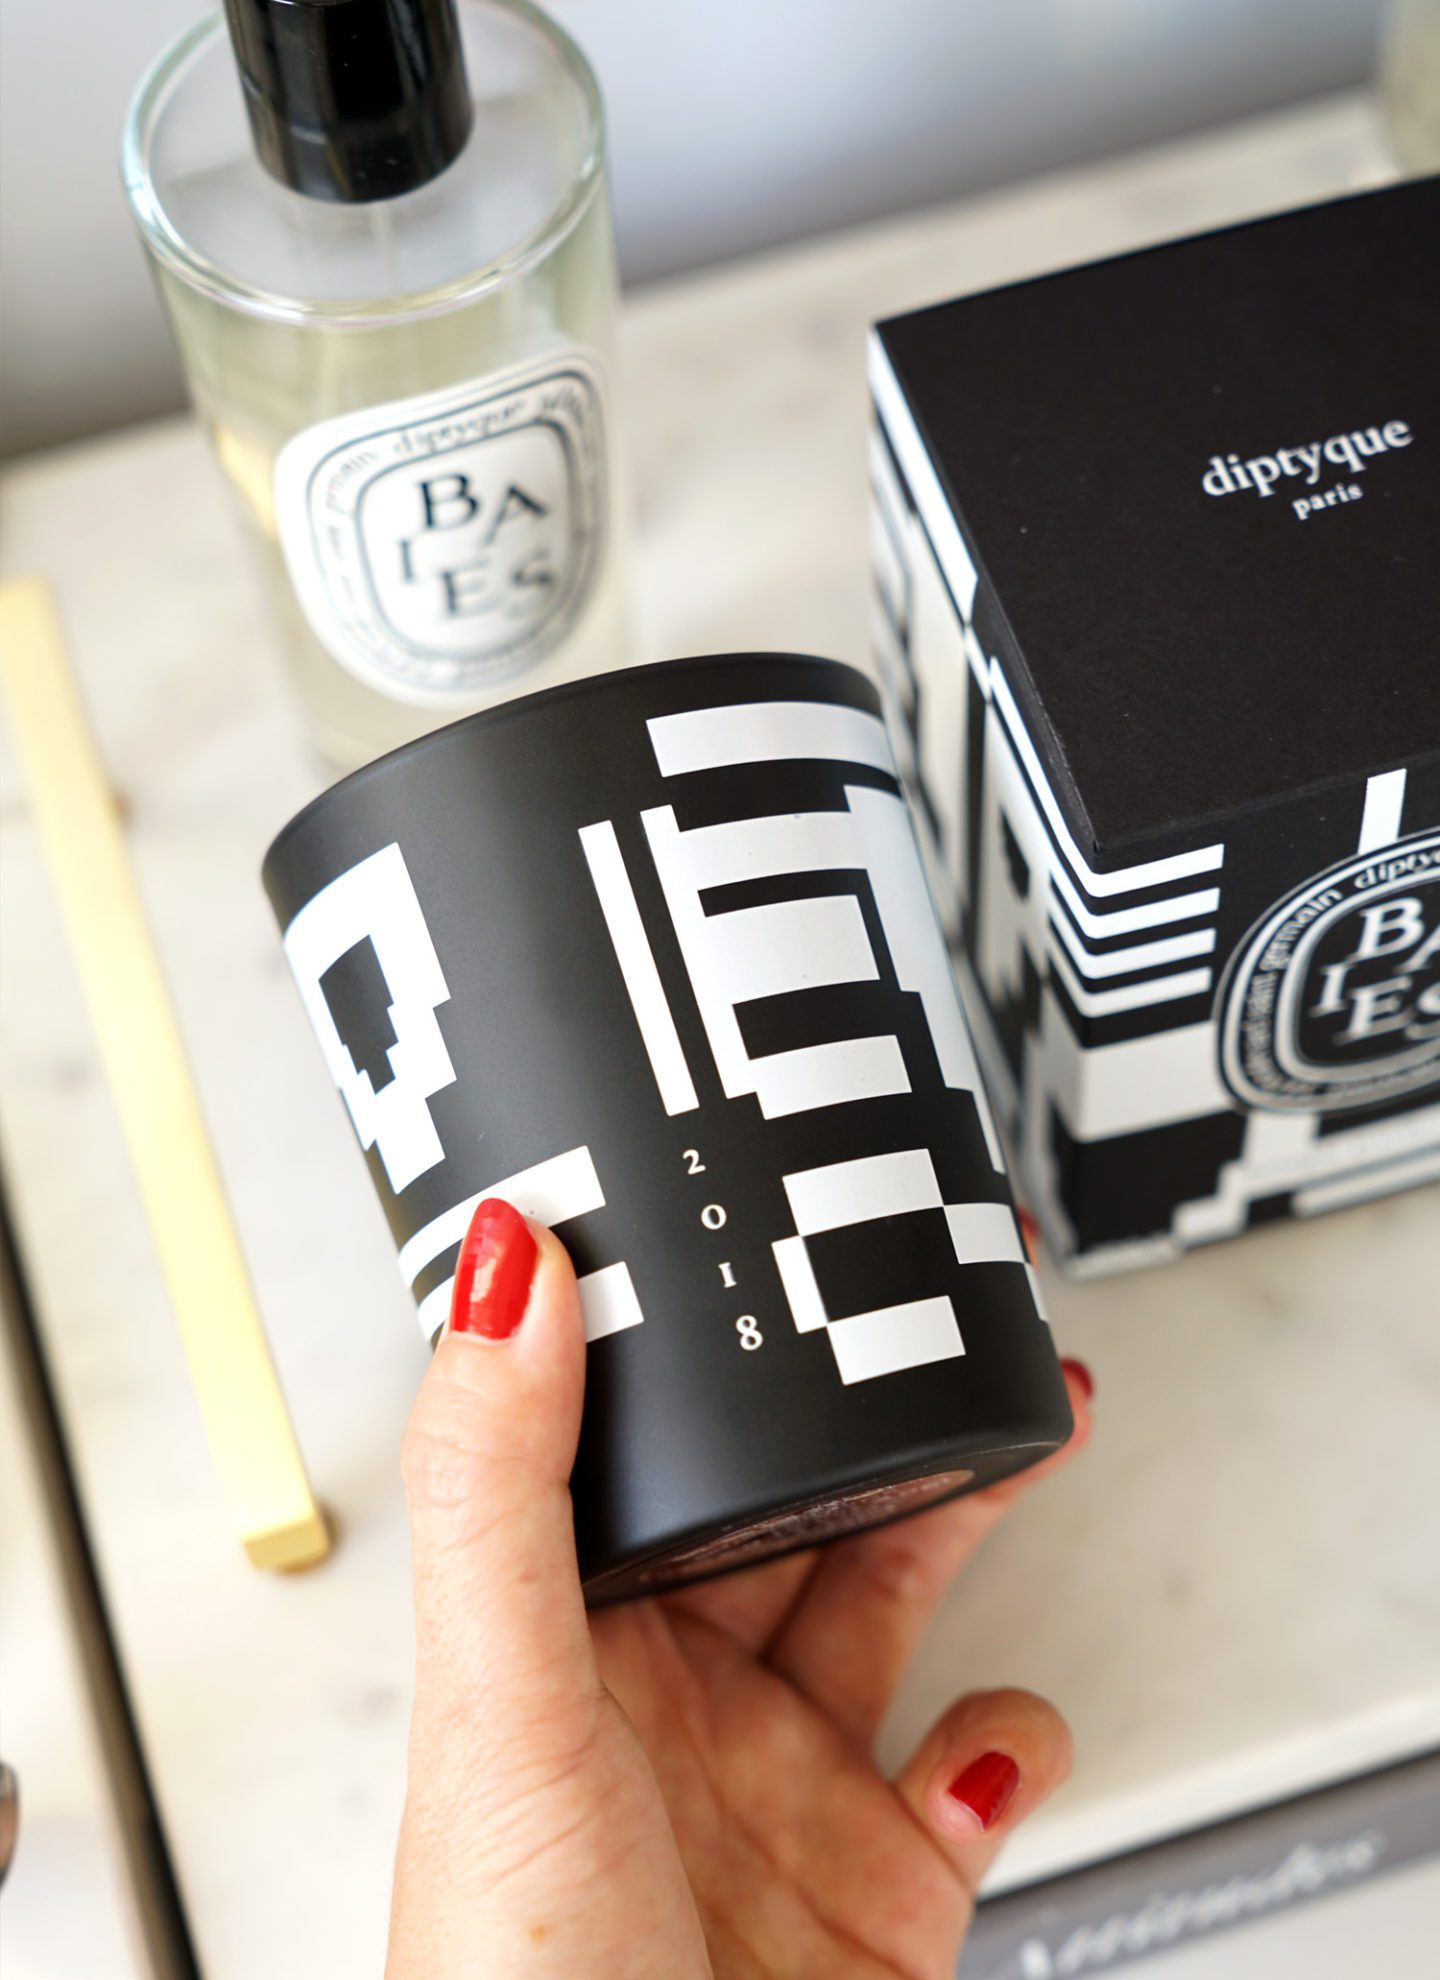 Diptyque Black Friday 2018 Baies | The Beauty Look Book